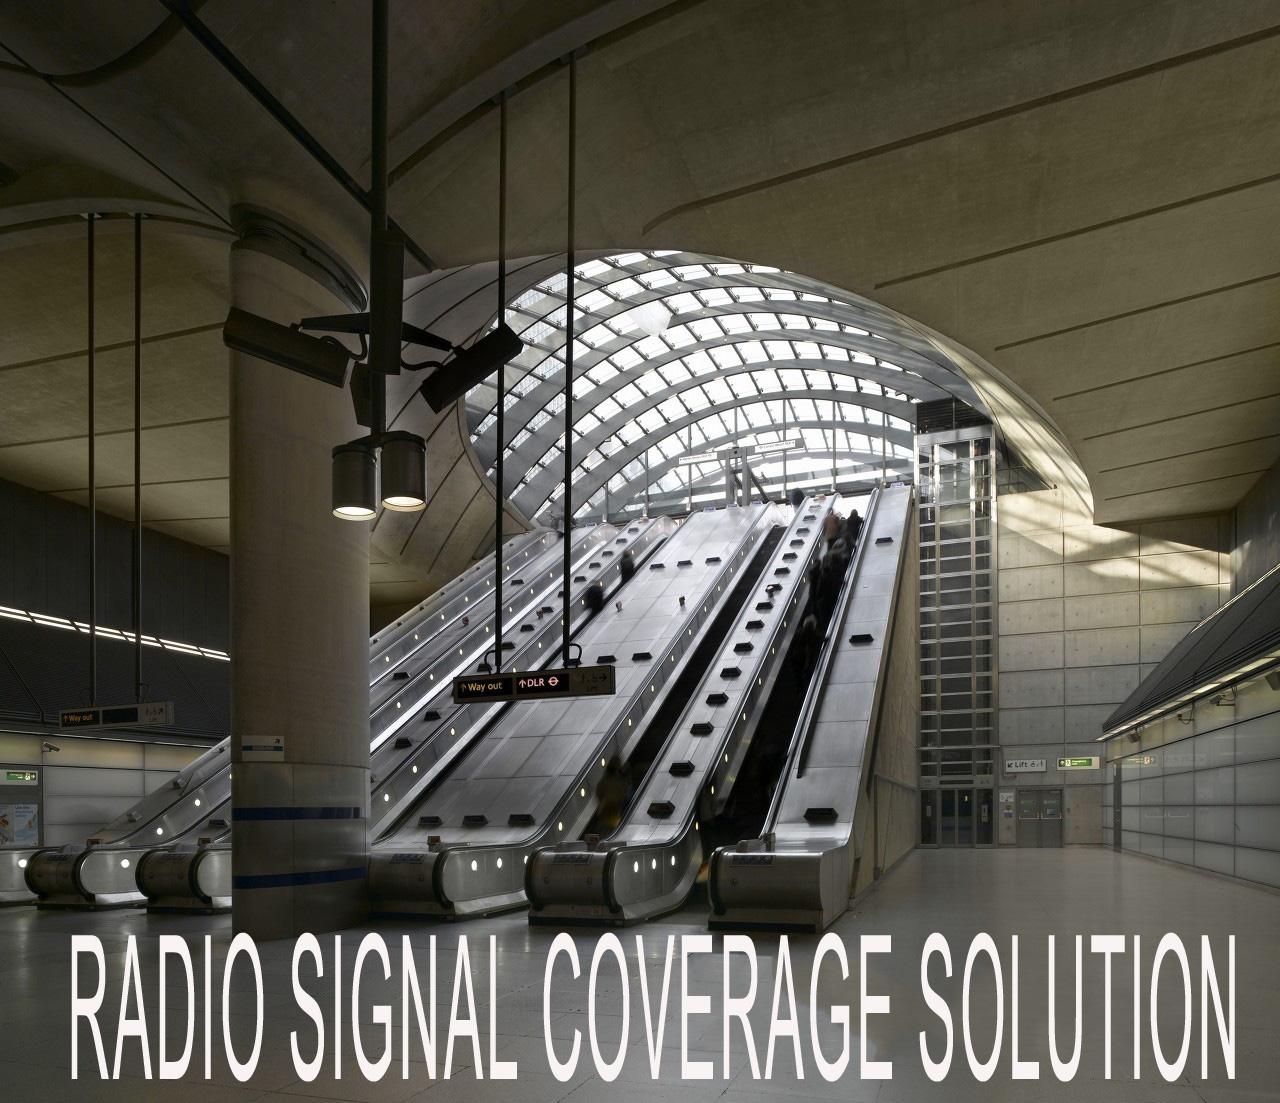 Solutions to expand the radio signal coverage